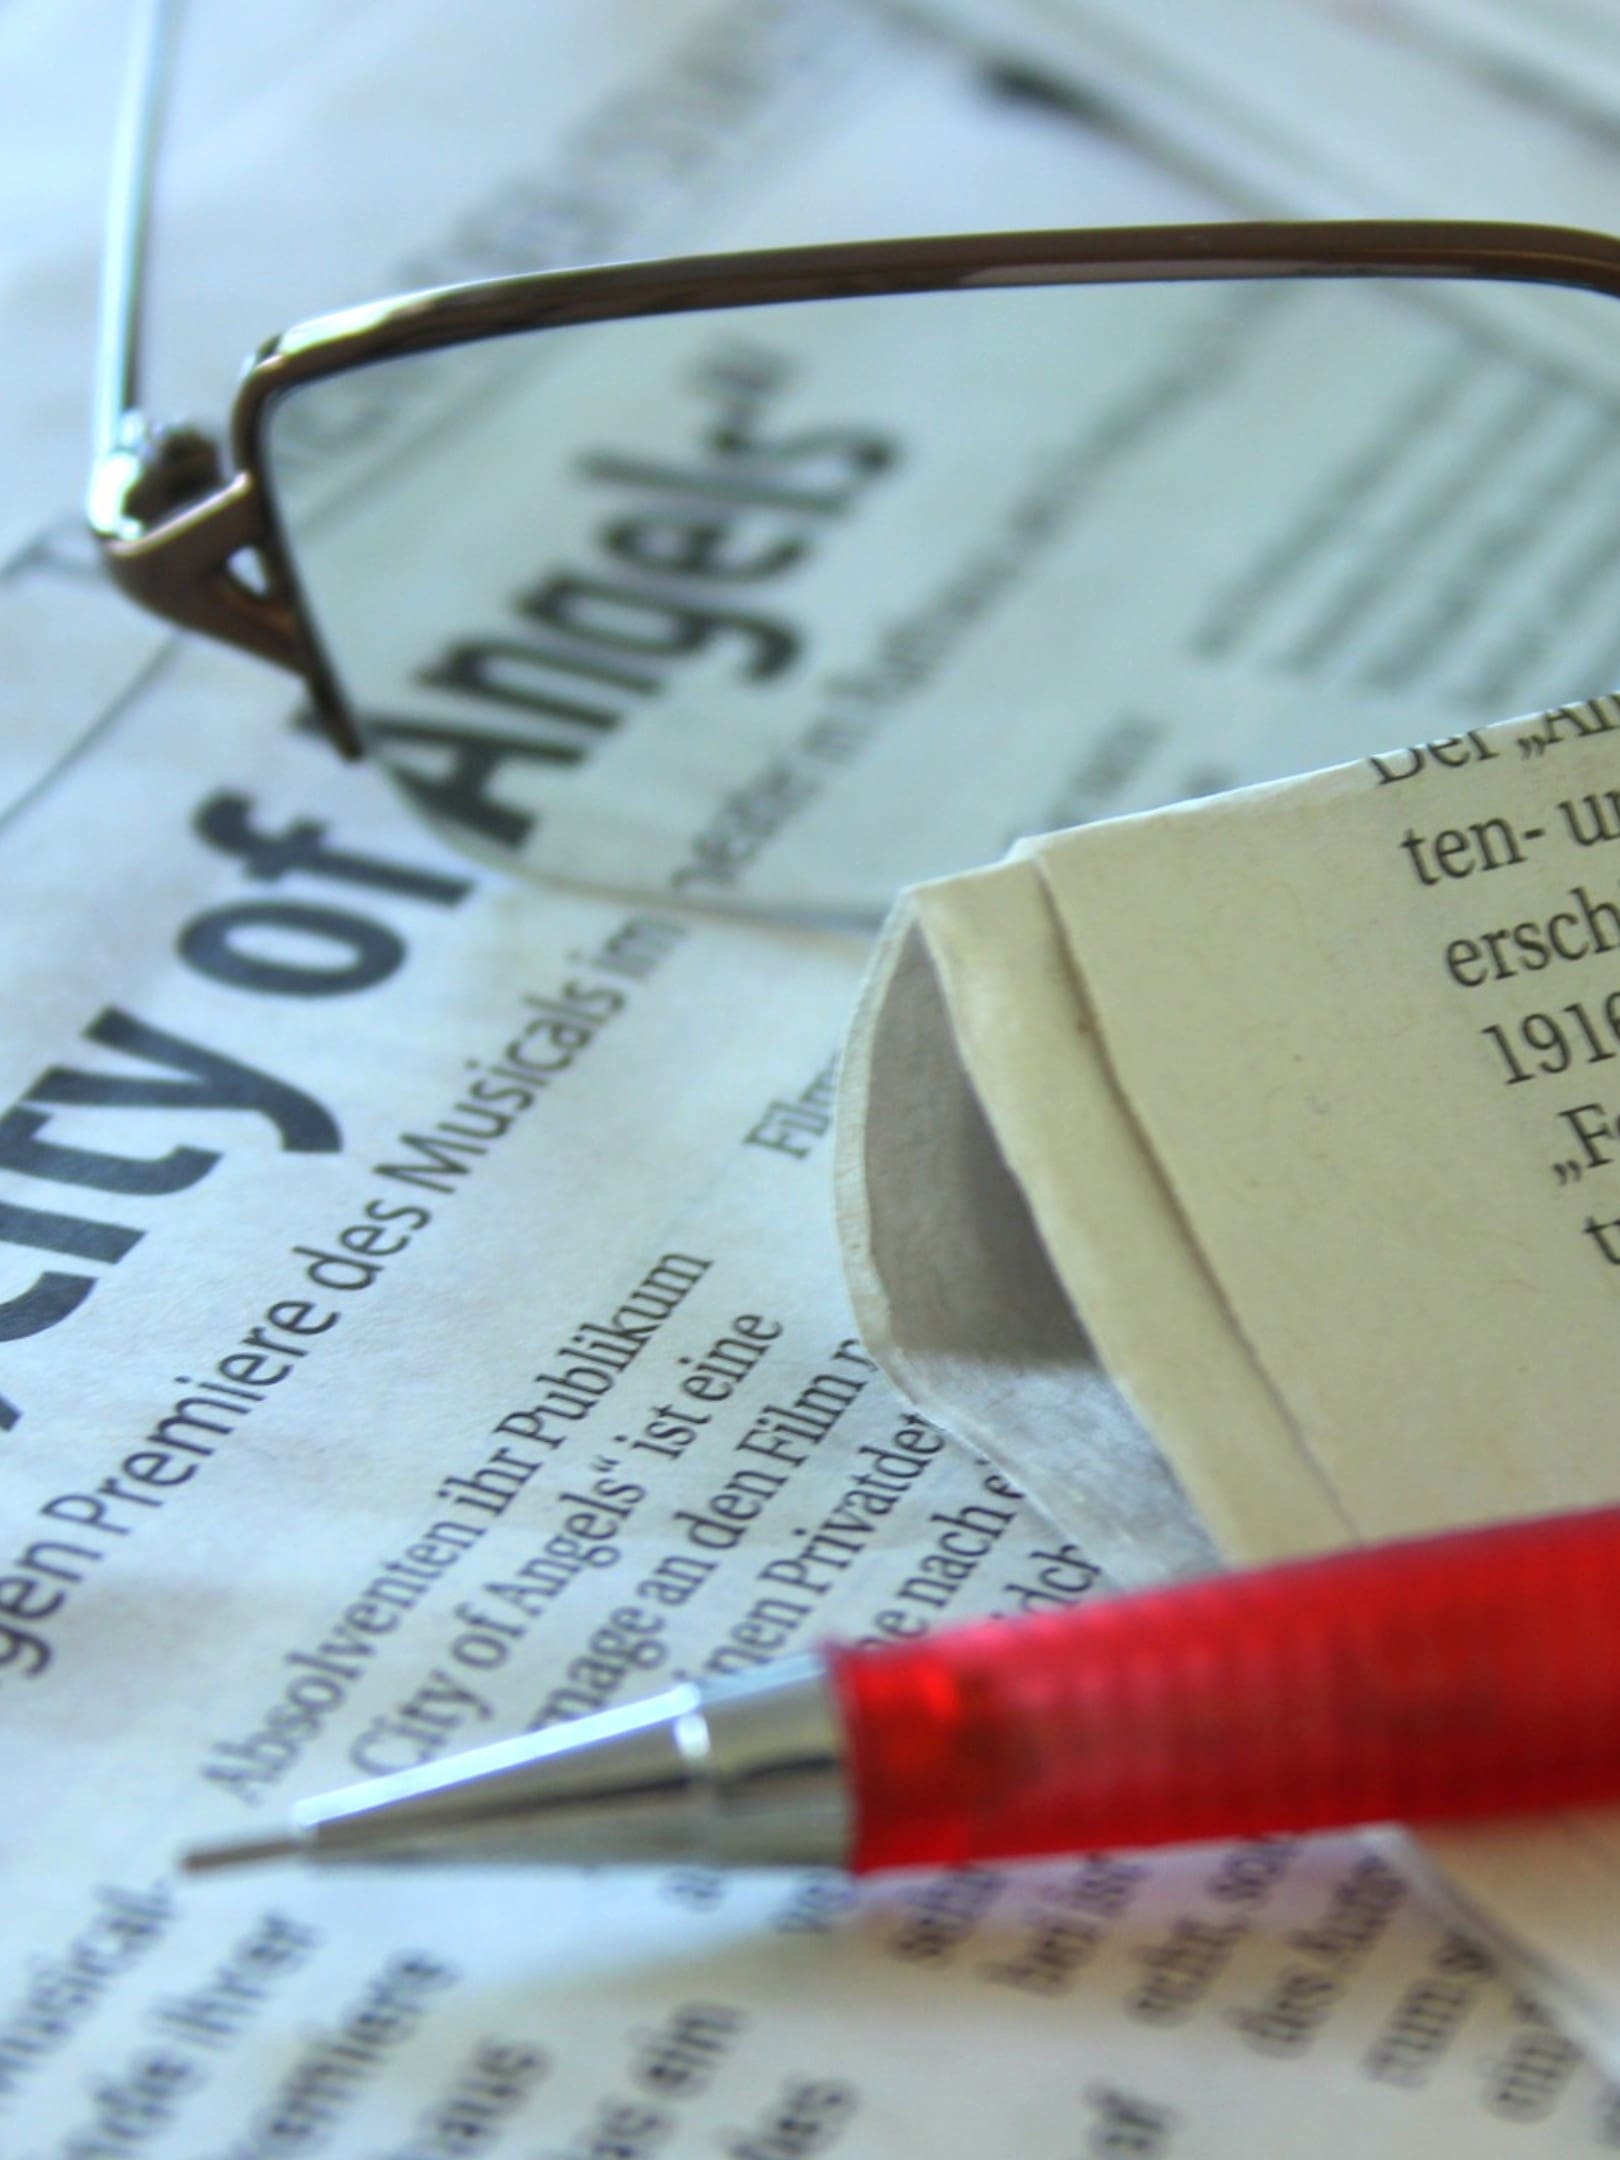 A pair of glasses and a pen on top of a newspaper.